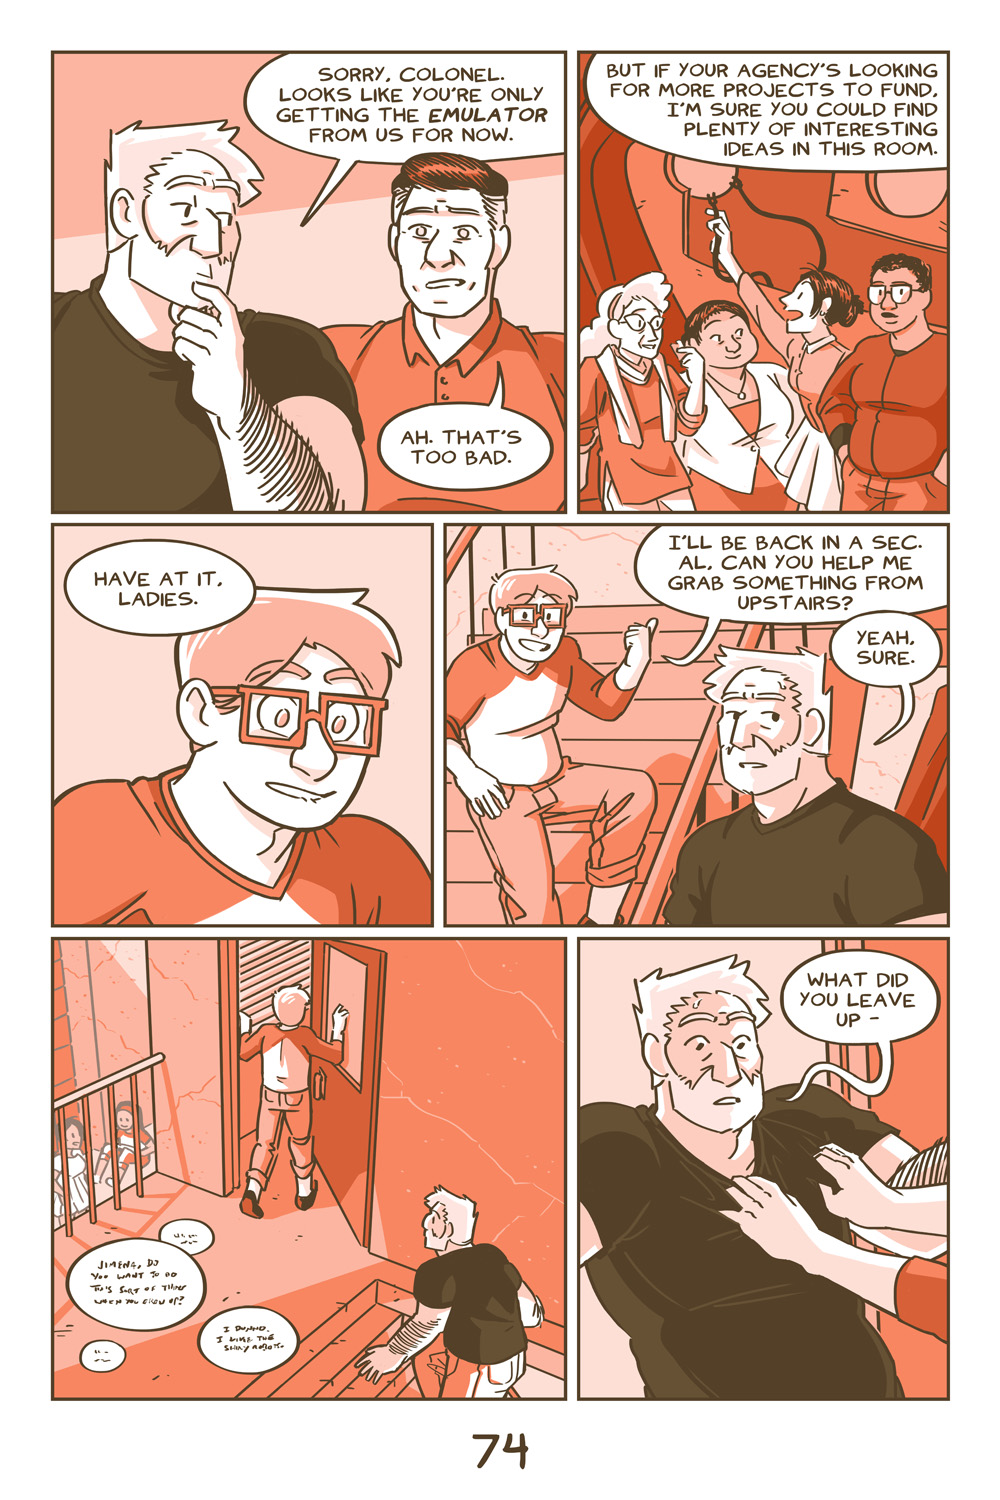 Chapter 4, Page 74